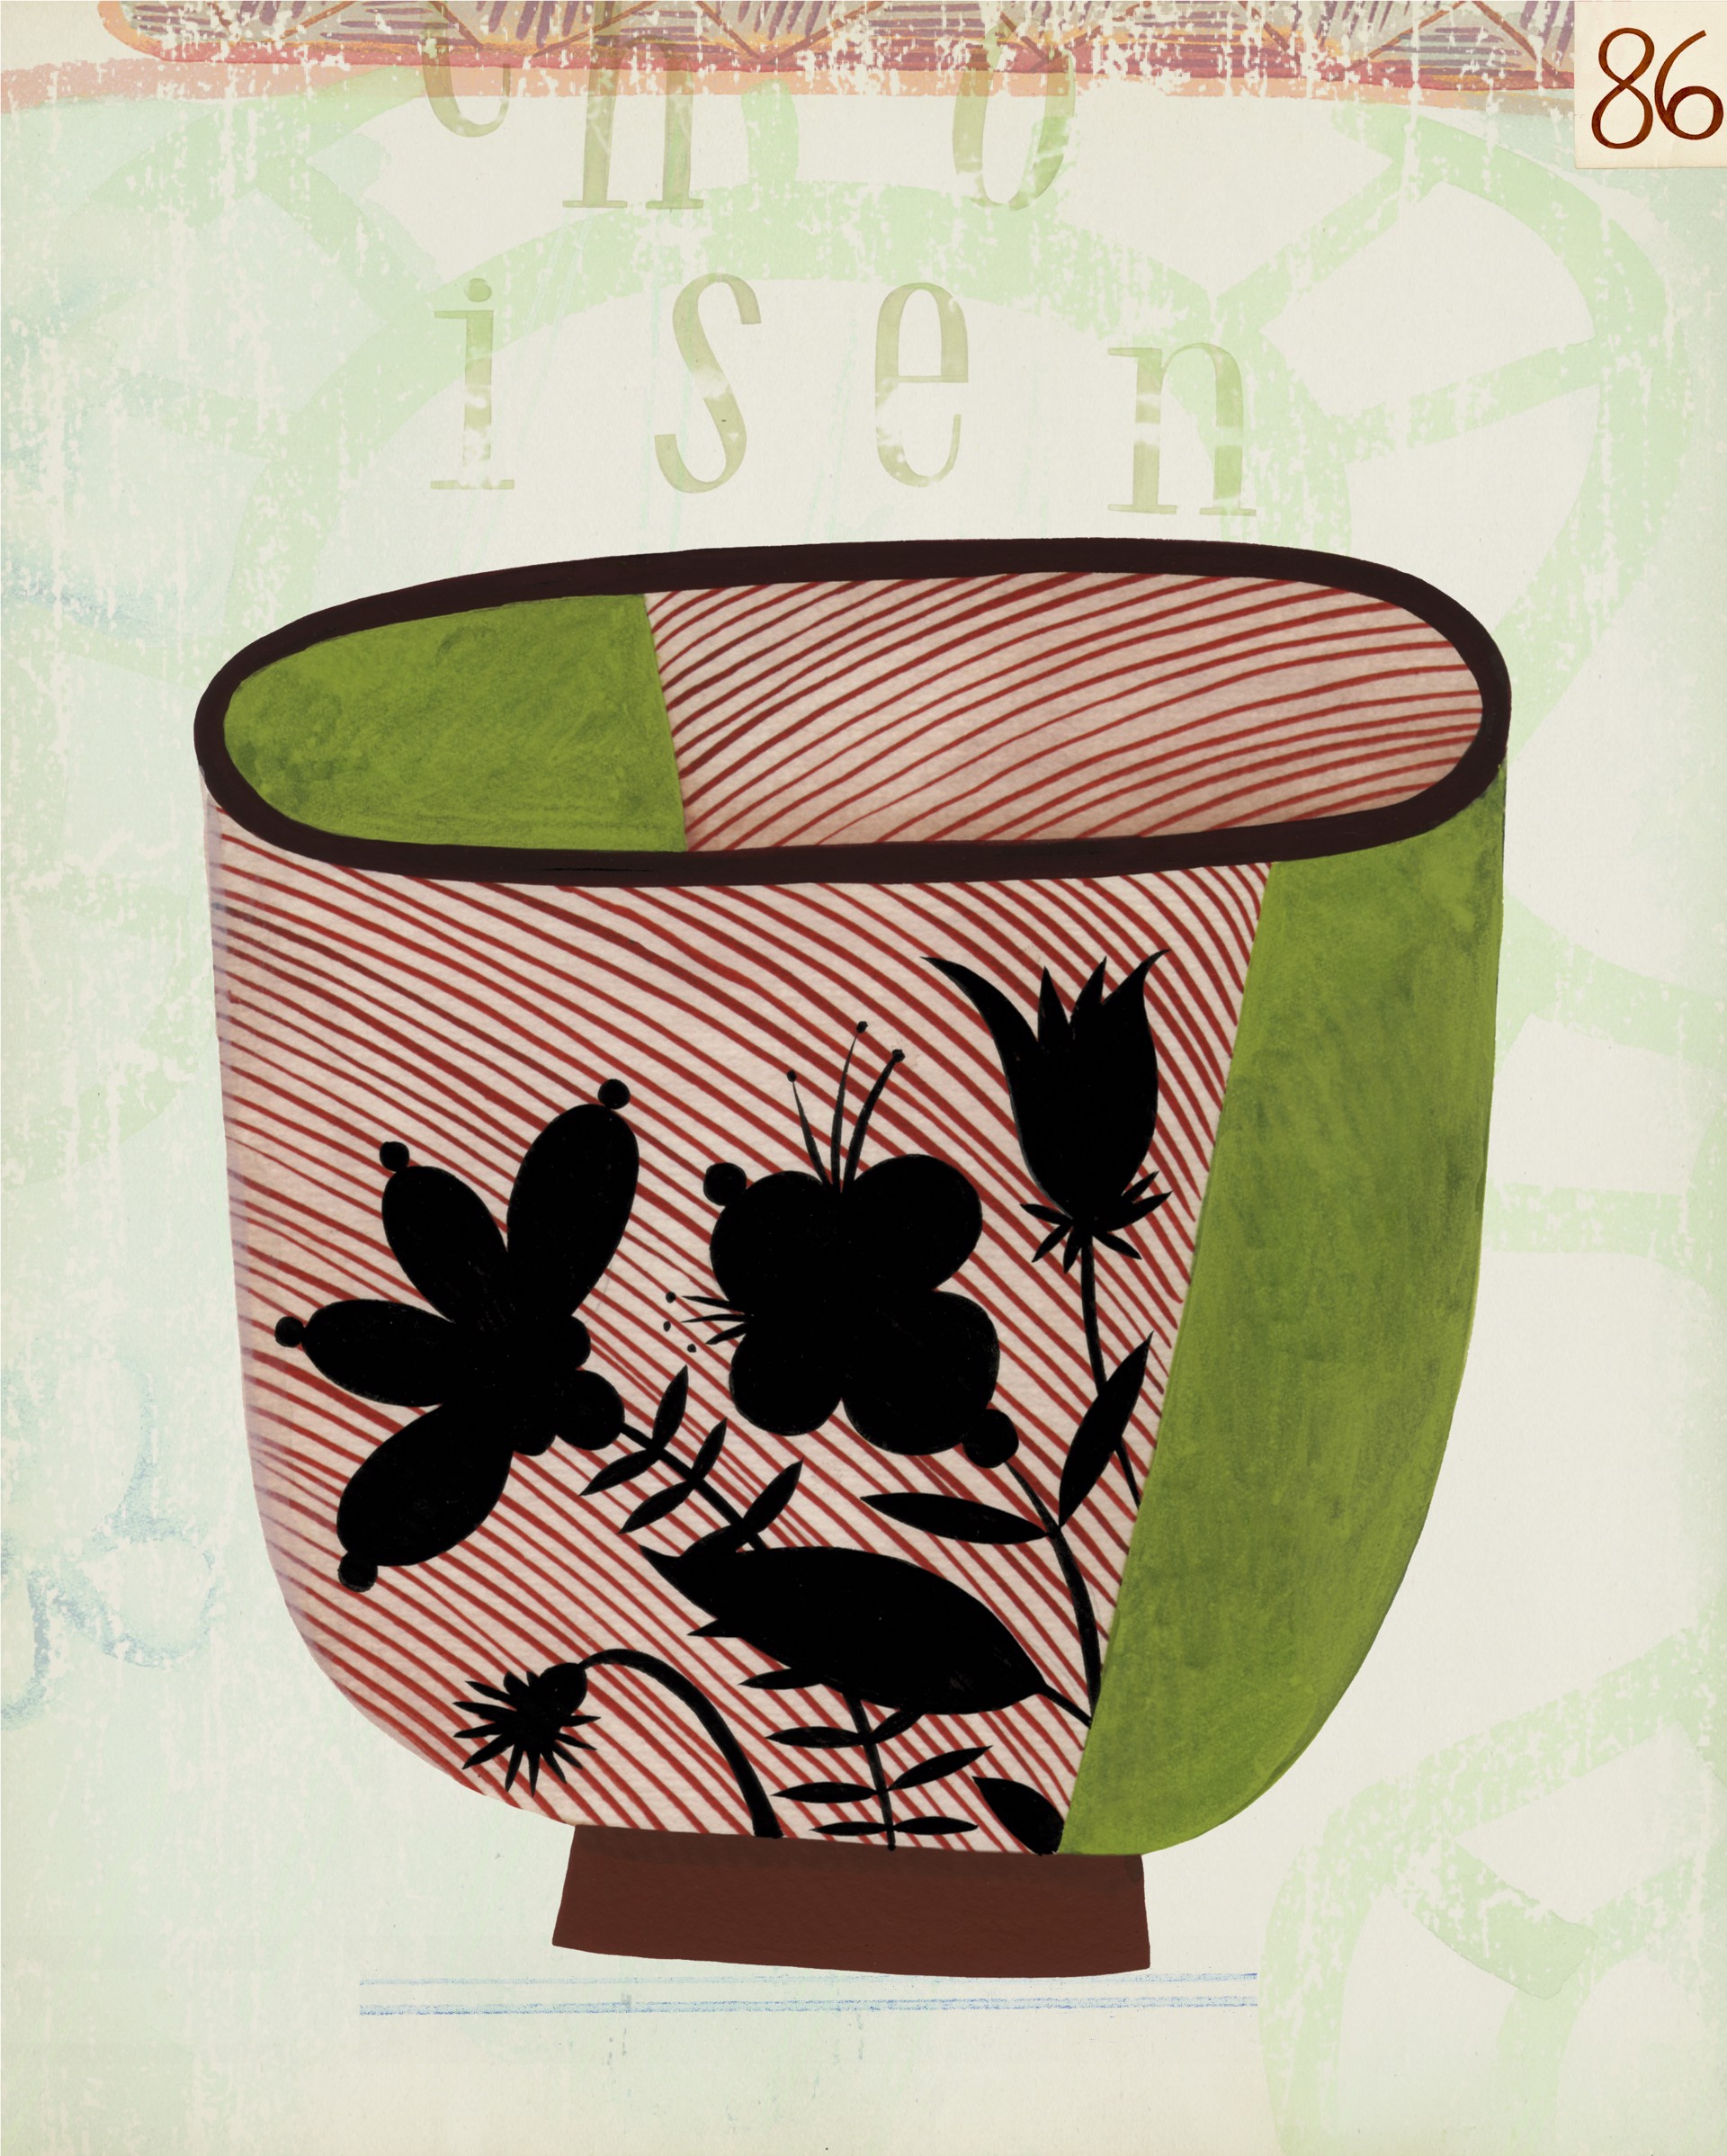 Cup No. 86 by Anne Smith